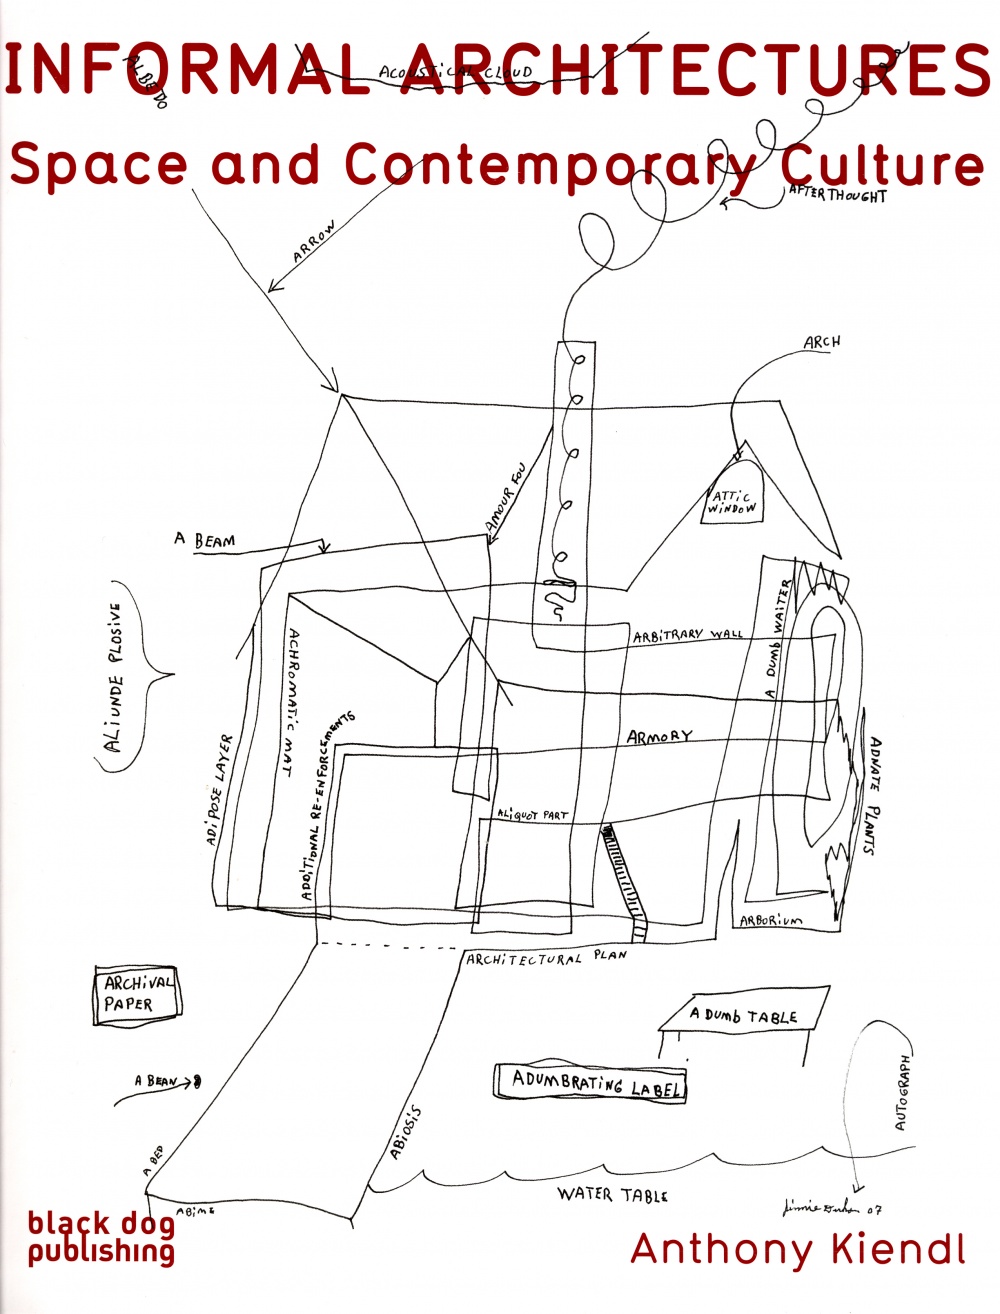 Informal Architectures: Space and Contemporary Culture